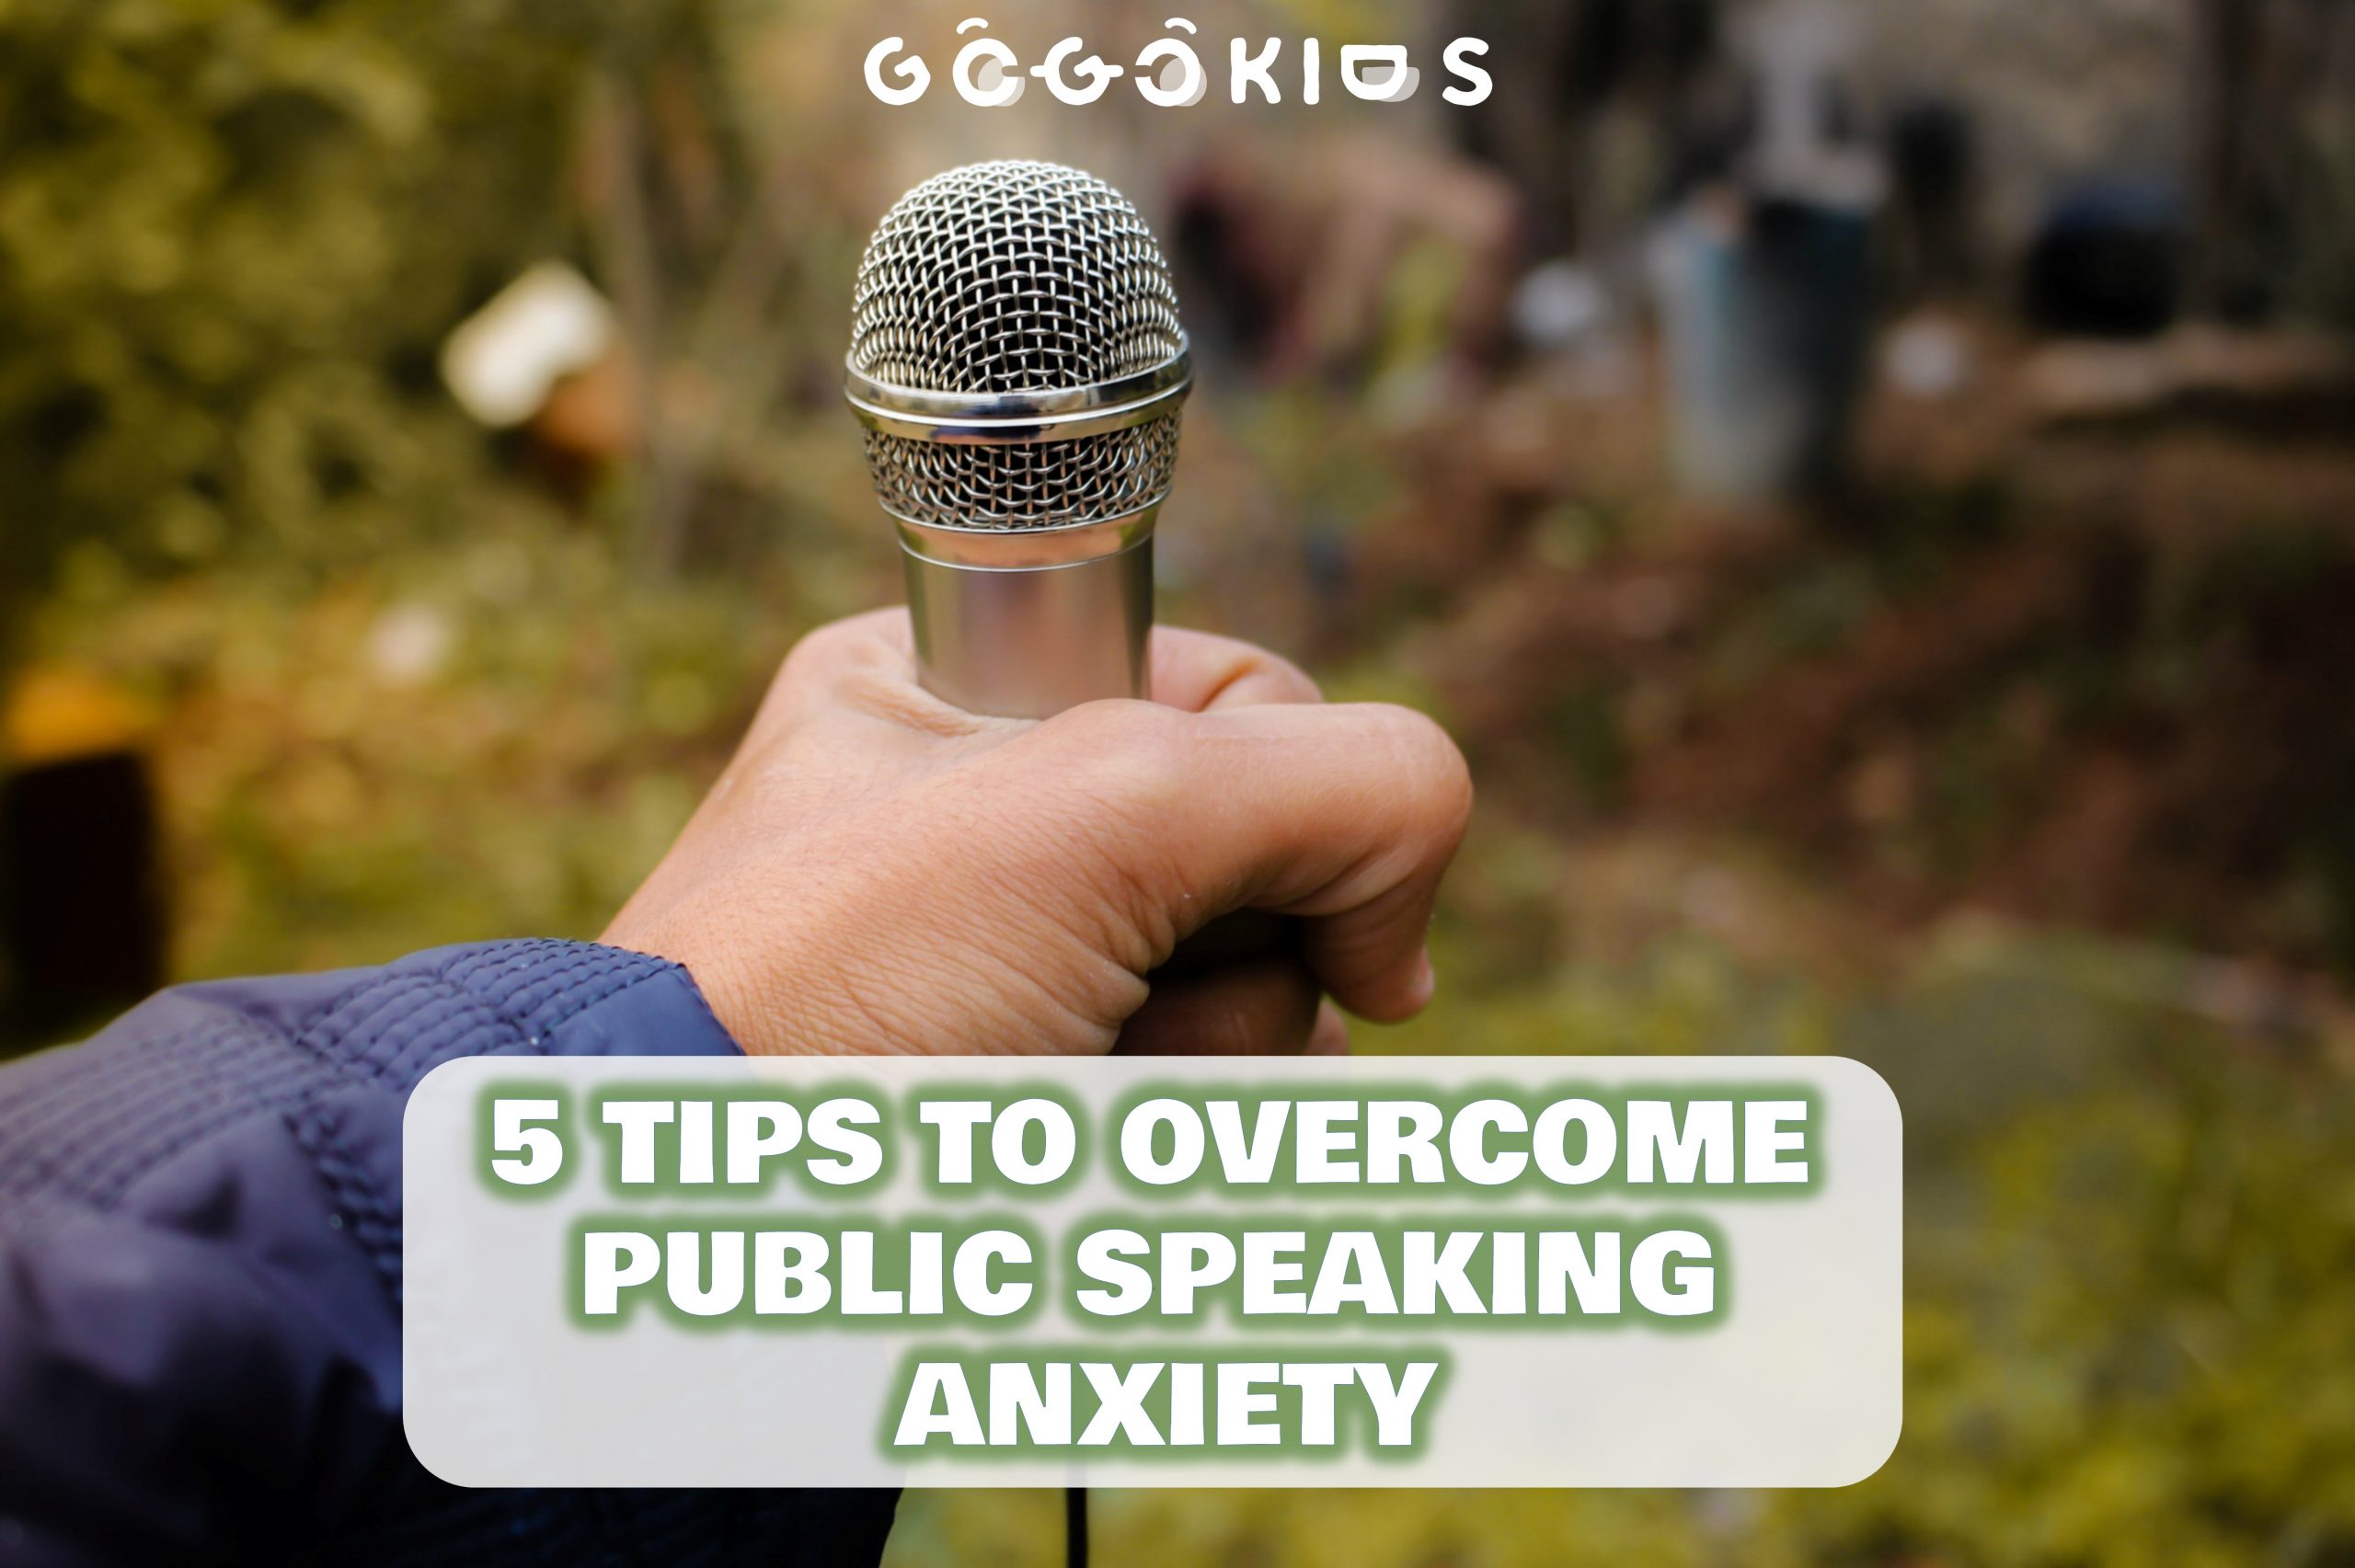 5 Tips to Overcome Public Speaking Anxiety